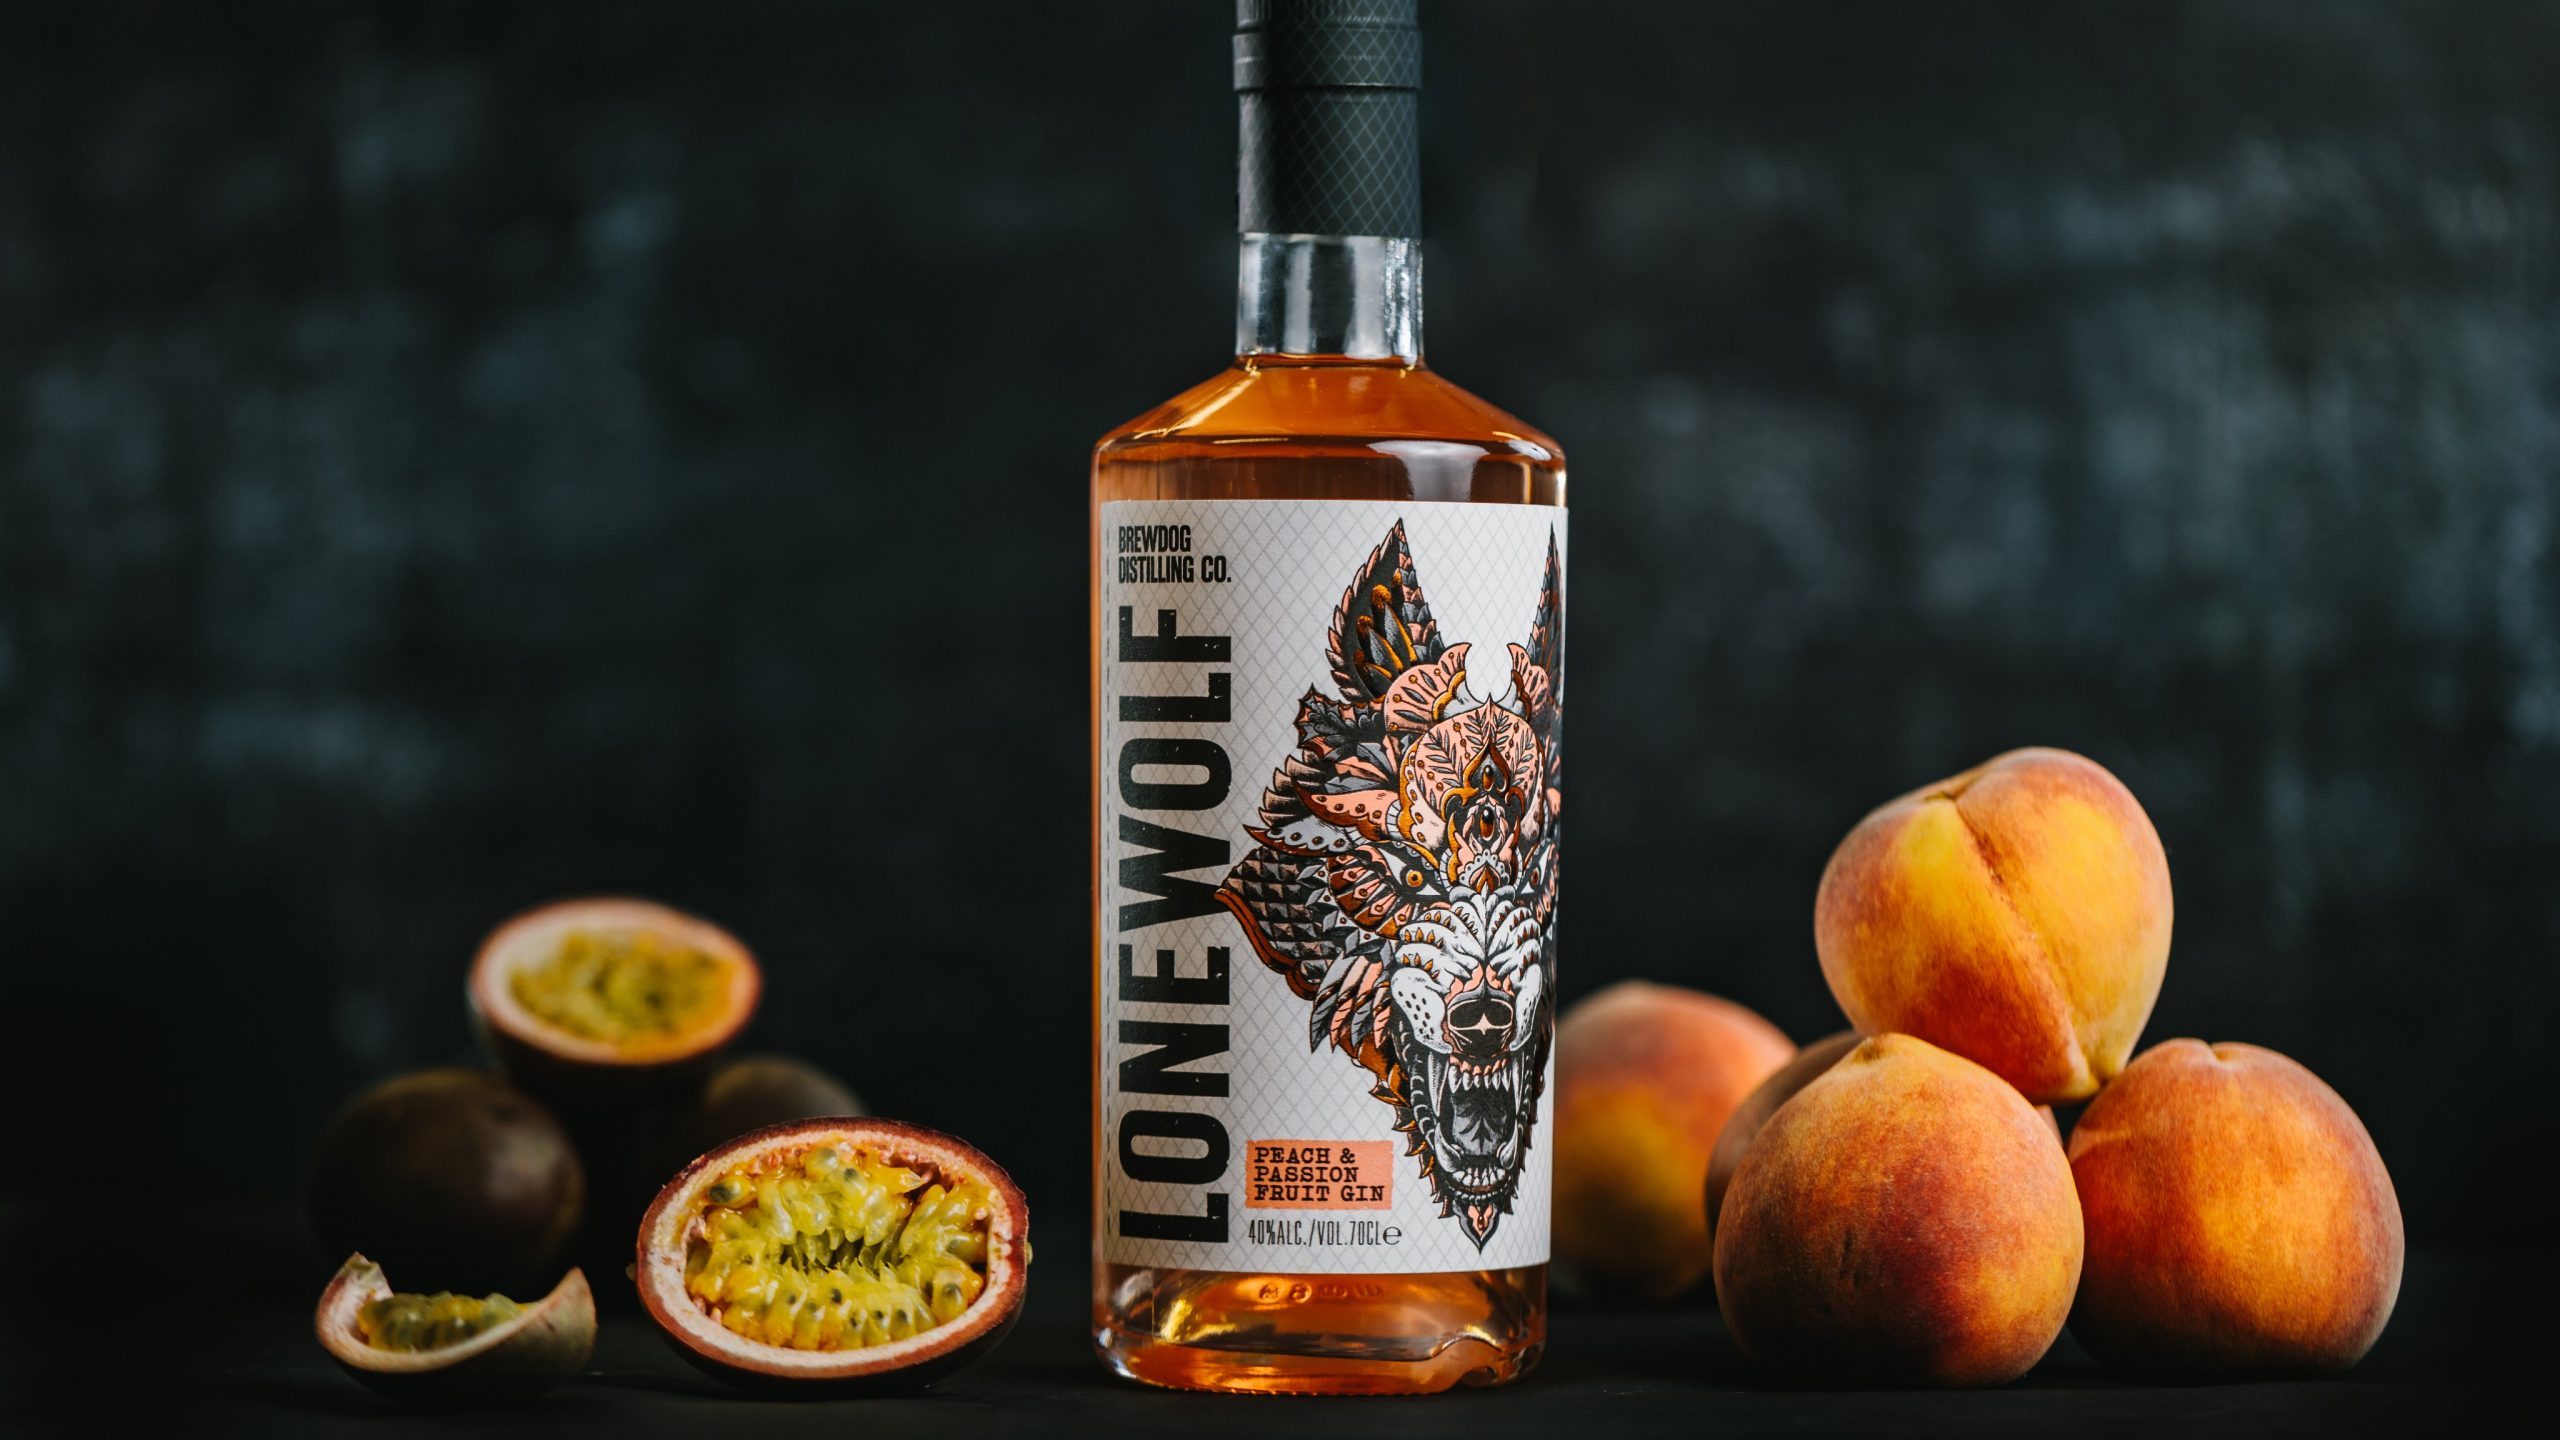 Lonewolf Peach and Passionfruit gin